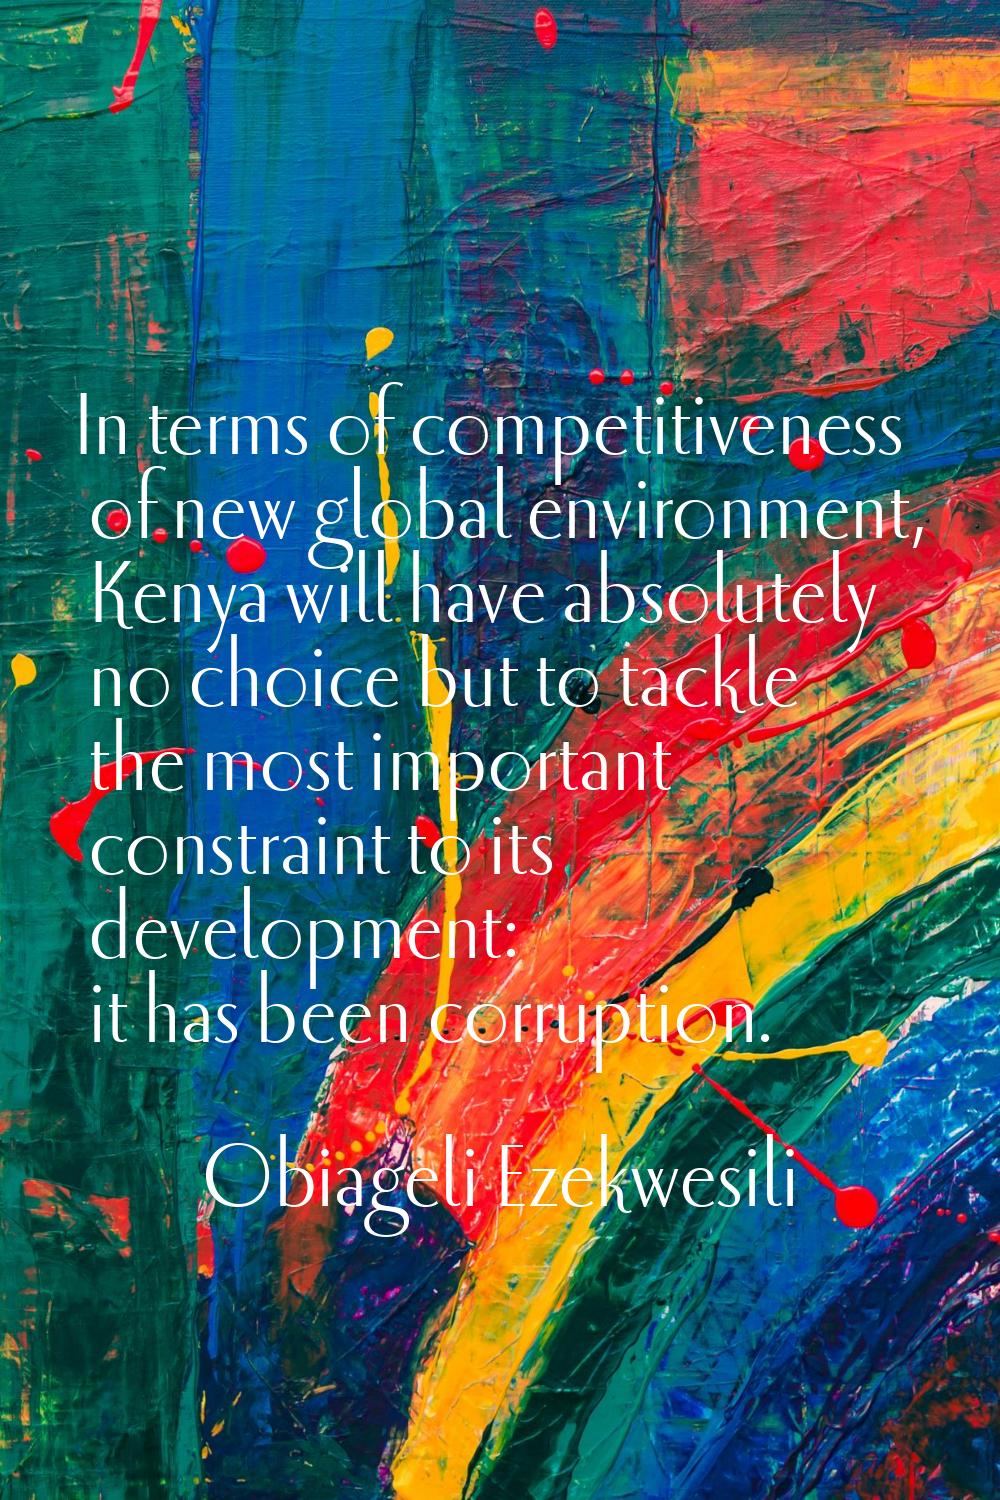 In terms of competitiveness of new global environment, Kenya will have absolutely no choice but to 